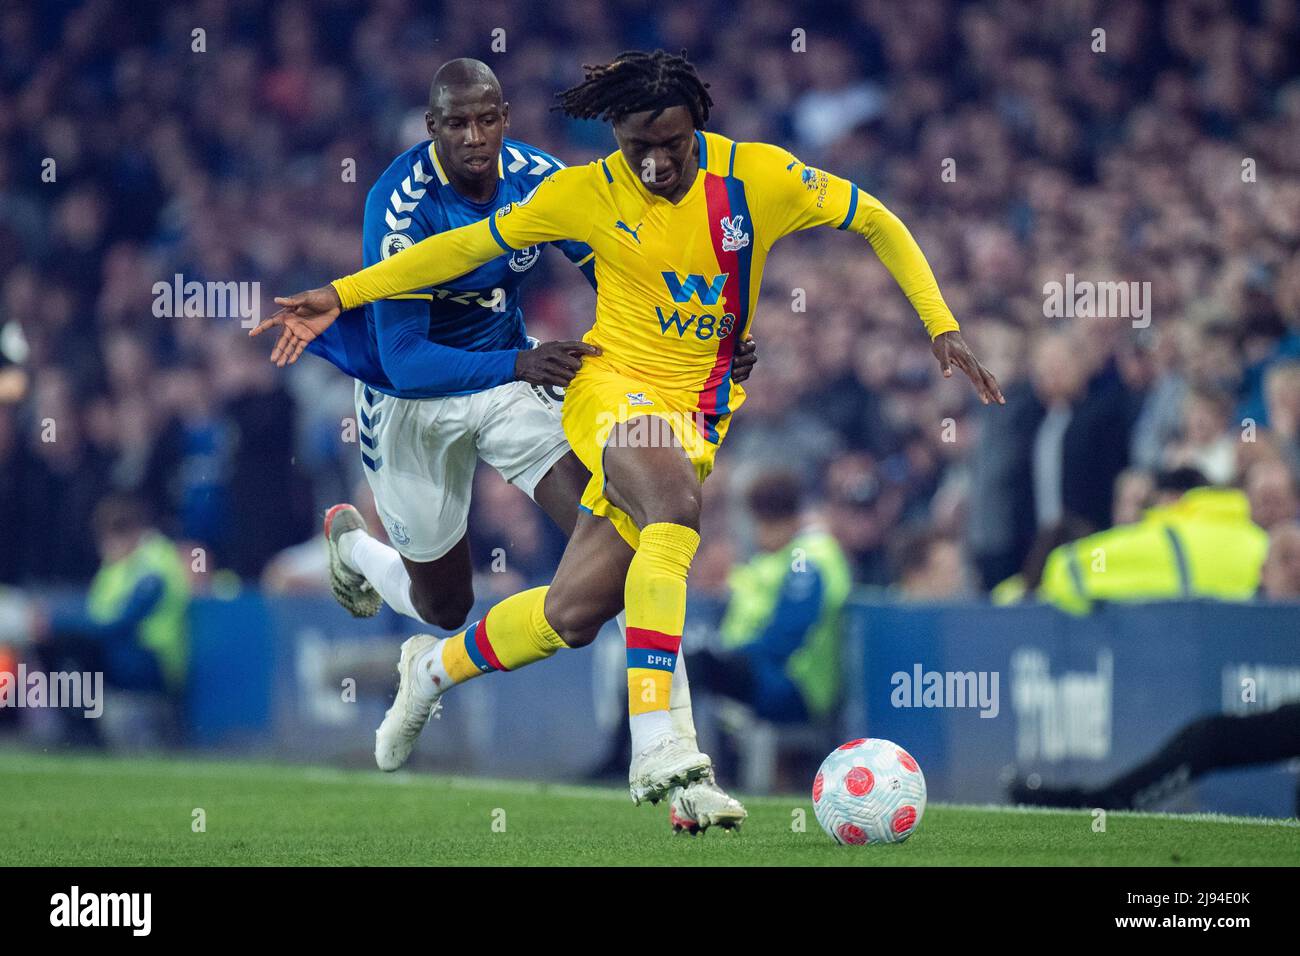 LIVERPOOL, ENGLAND - MAY 19: Eberechi Eze and Abdoulaye Doucoure during the Premier League match between Everton and Crystal Palace at Goodison Park on May 19, 2022 in Liverpool, United Kingdom. (Photo by Sebastian Frej) Stock Photo